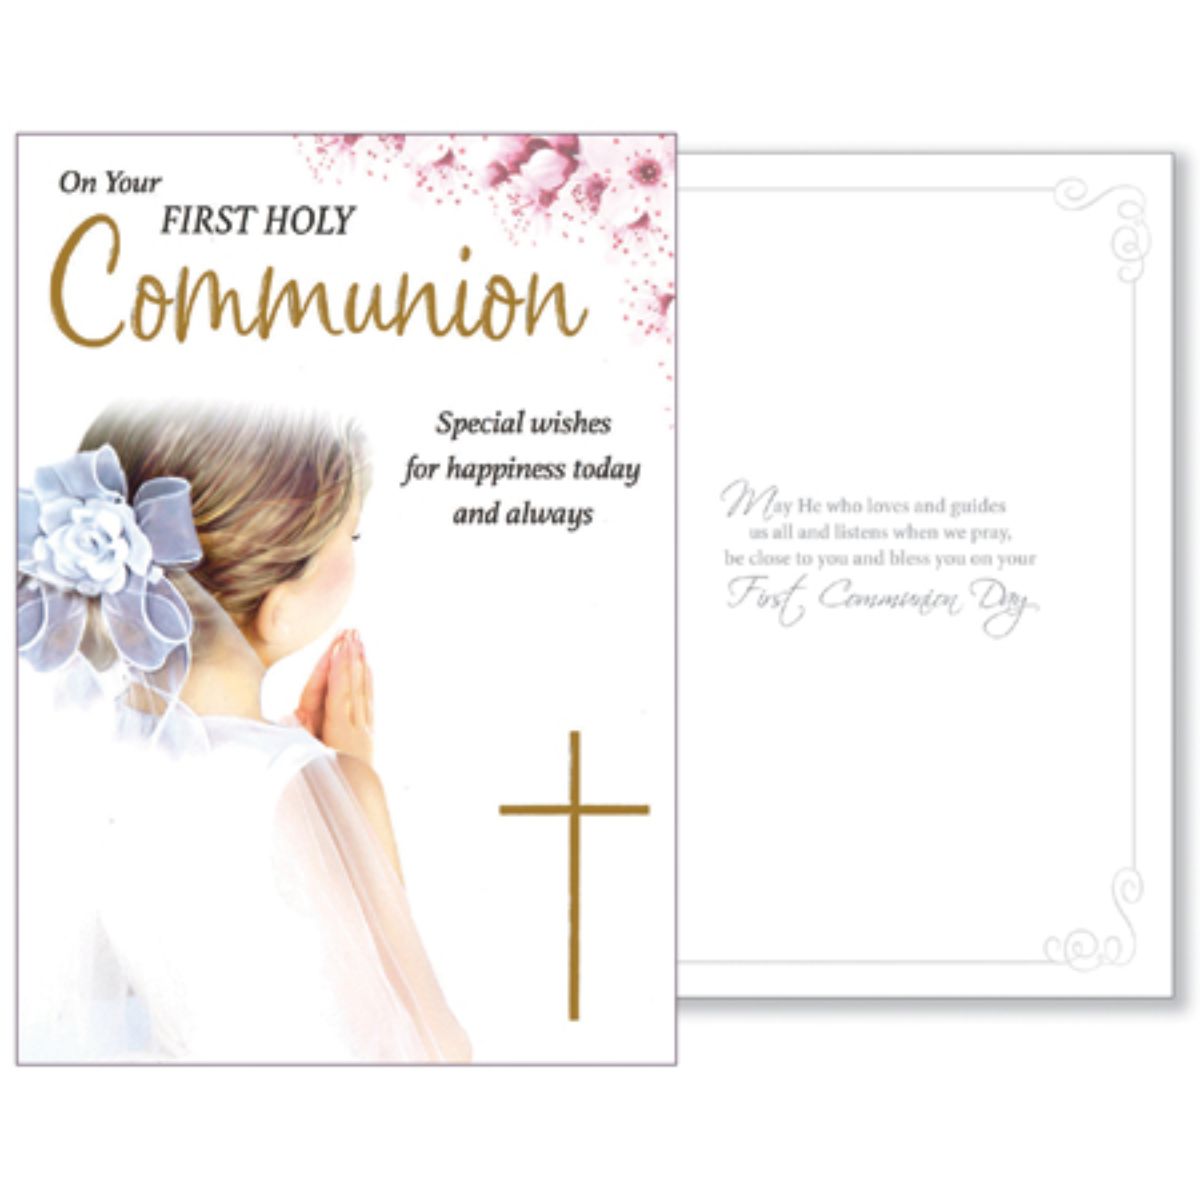 on-your-first-holy-communion-special-wishes-greetings-card-for-a-girl